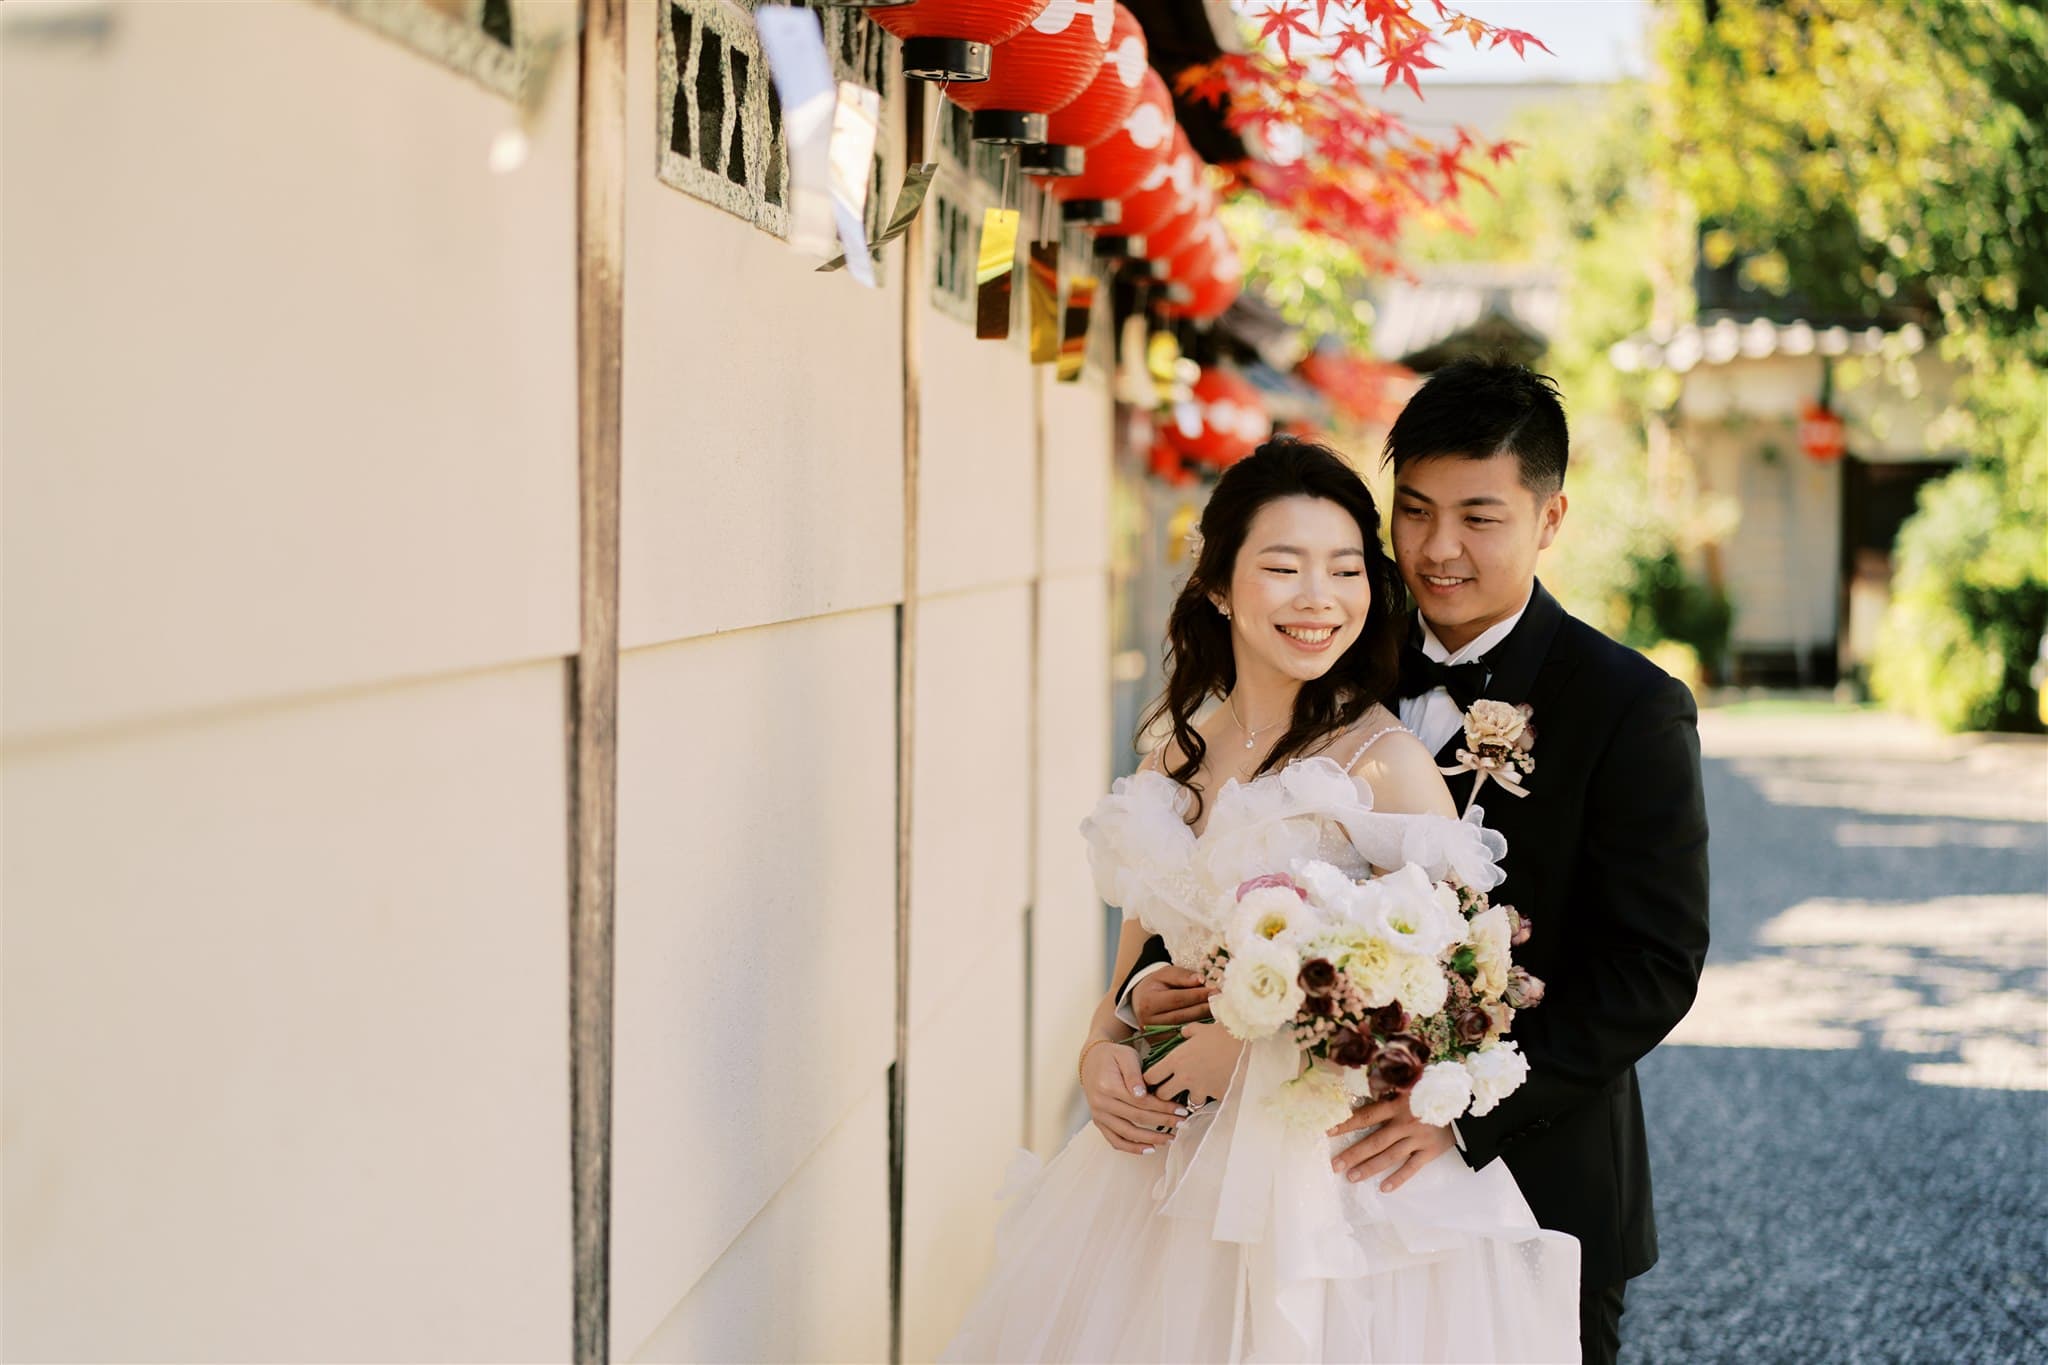 Kyoto Tokyo Japan Elopement Wedding Photographer, Planner & Videographer | A Japan elopement photographer captures a bride and groom posing for a photo in front of a wall.